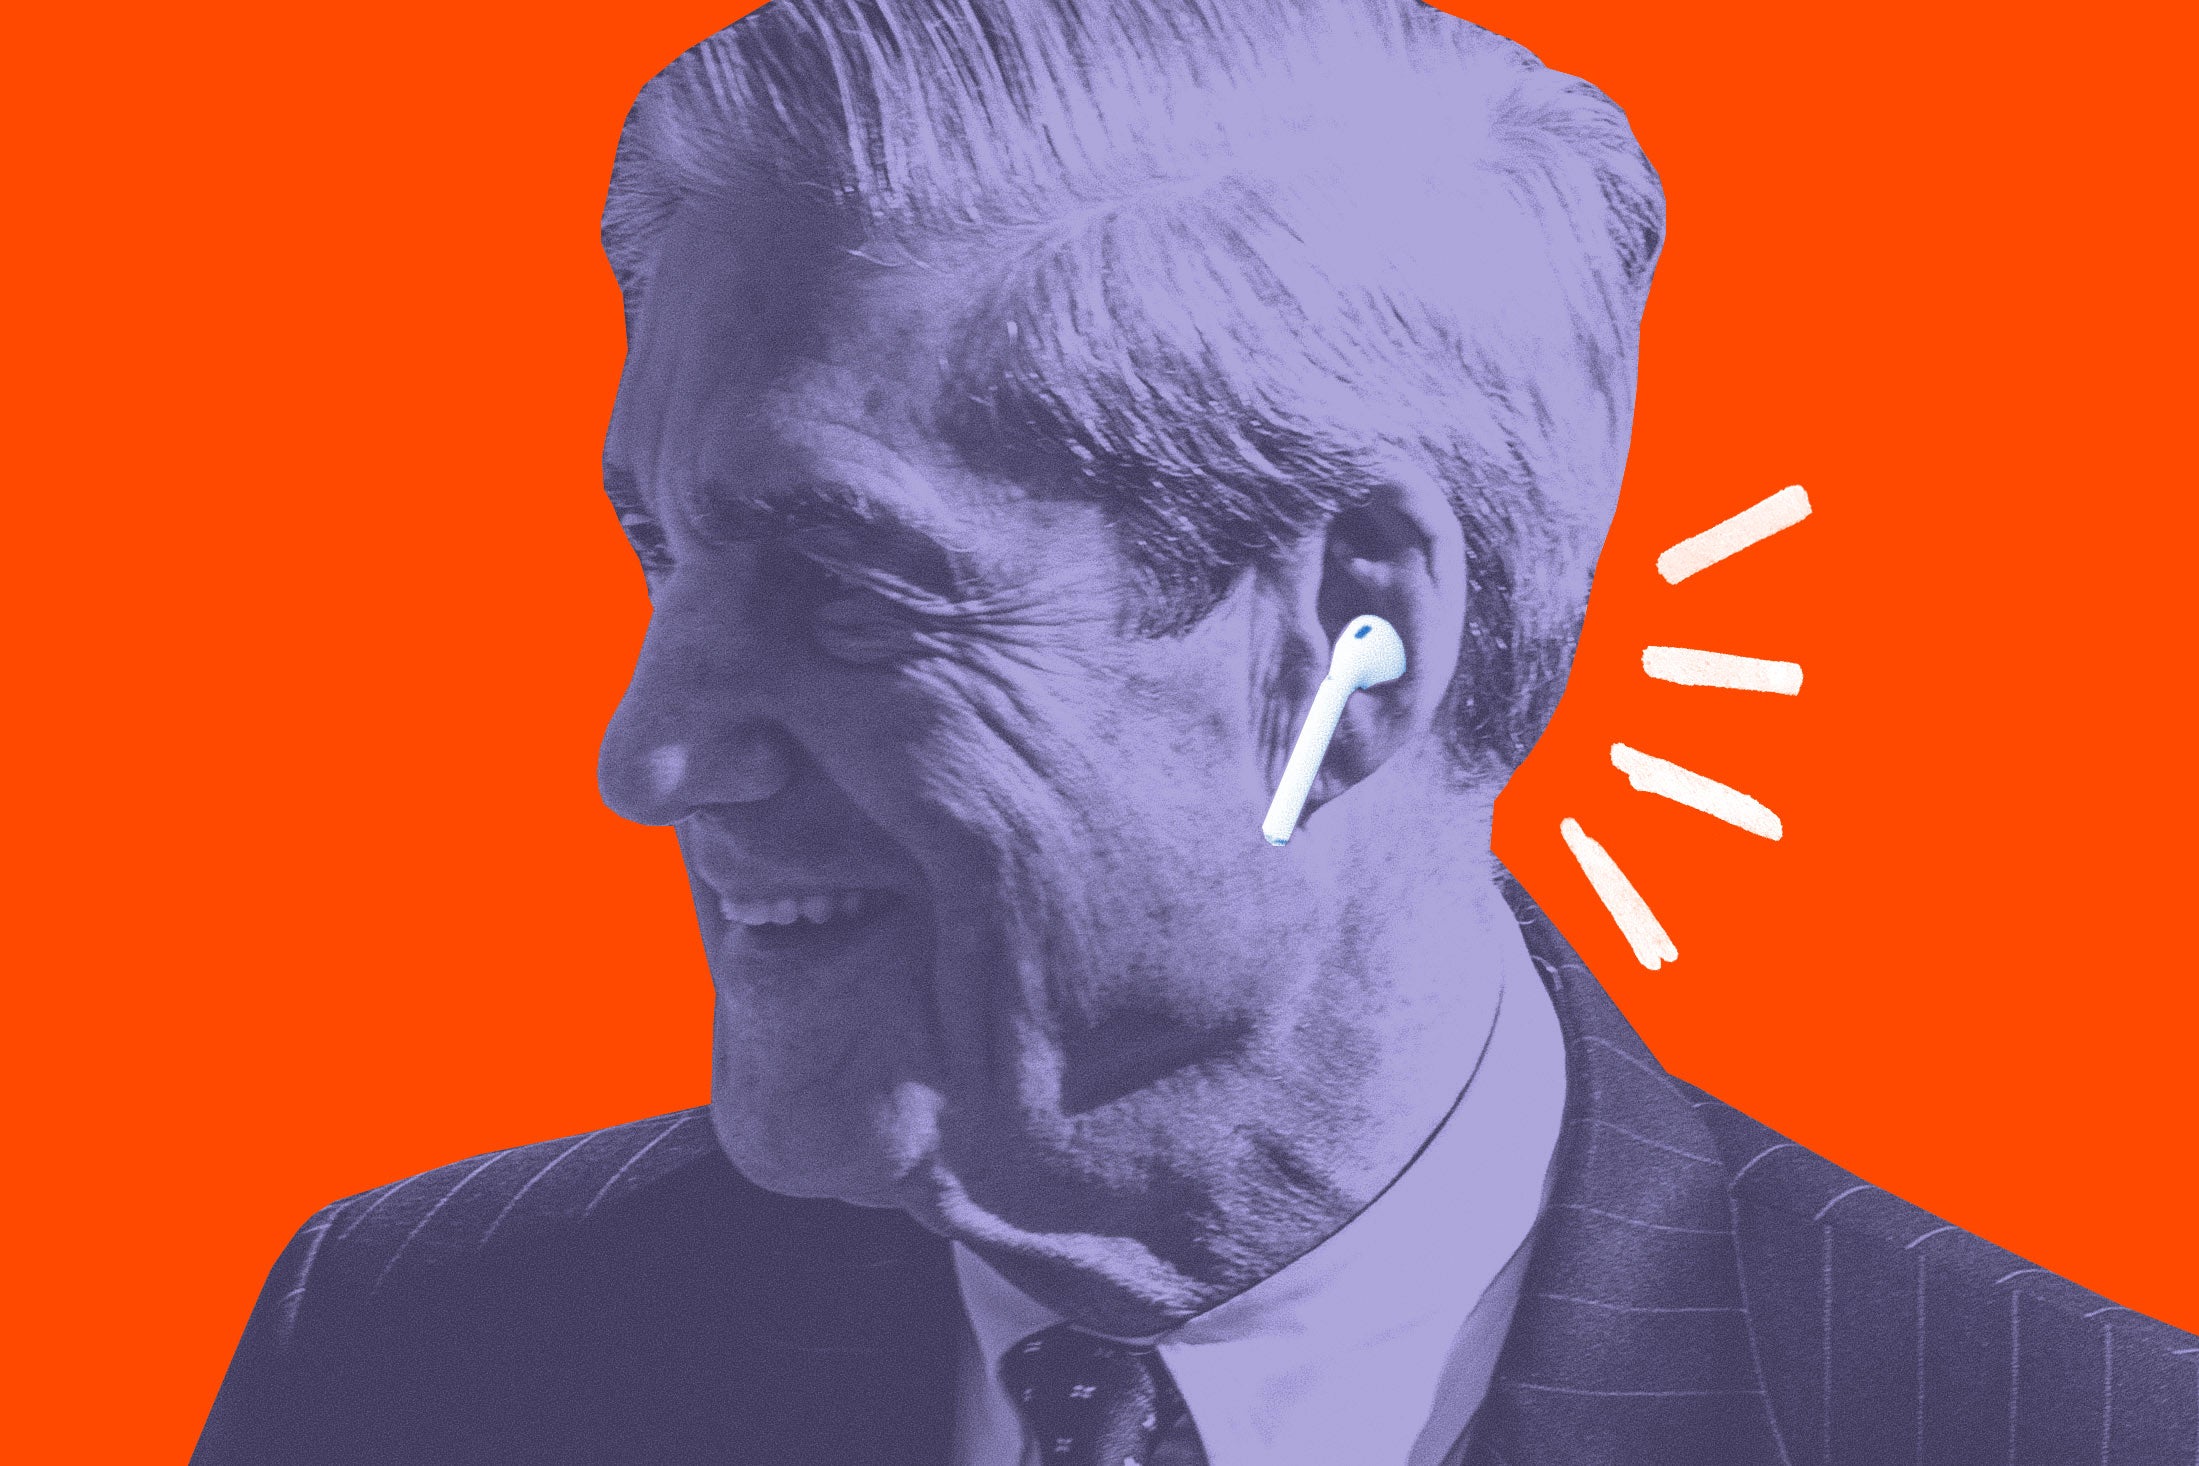 Robert Mueller wearing airpods, listening to the audio version of his own report, presumably